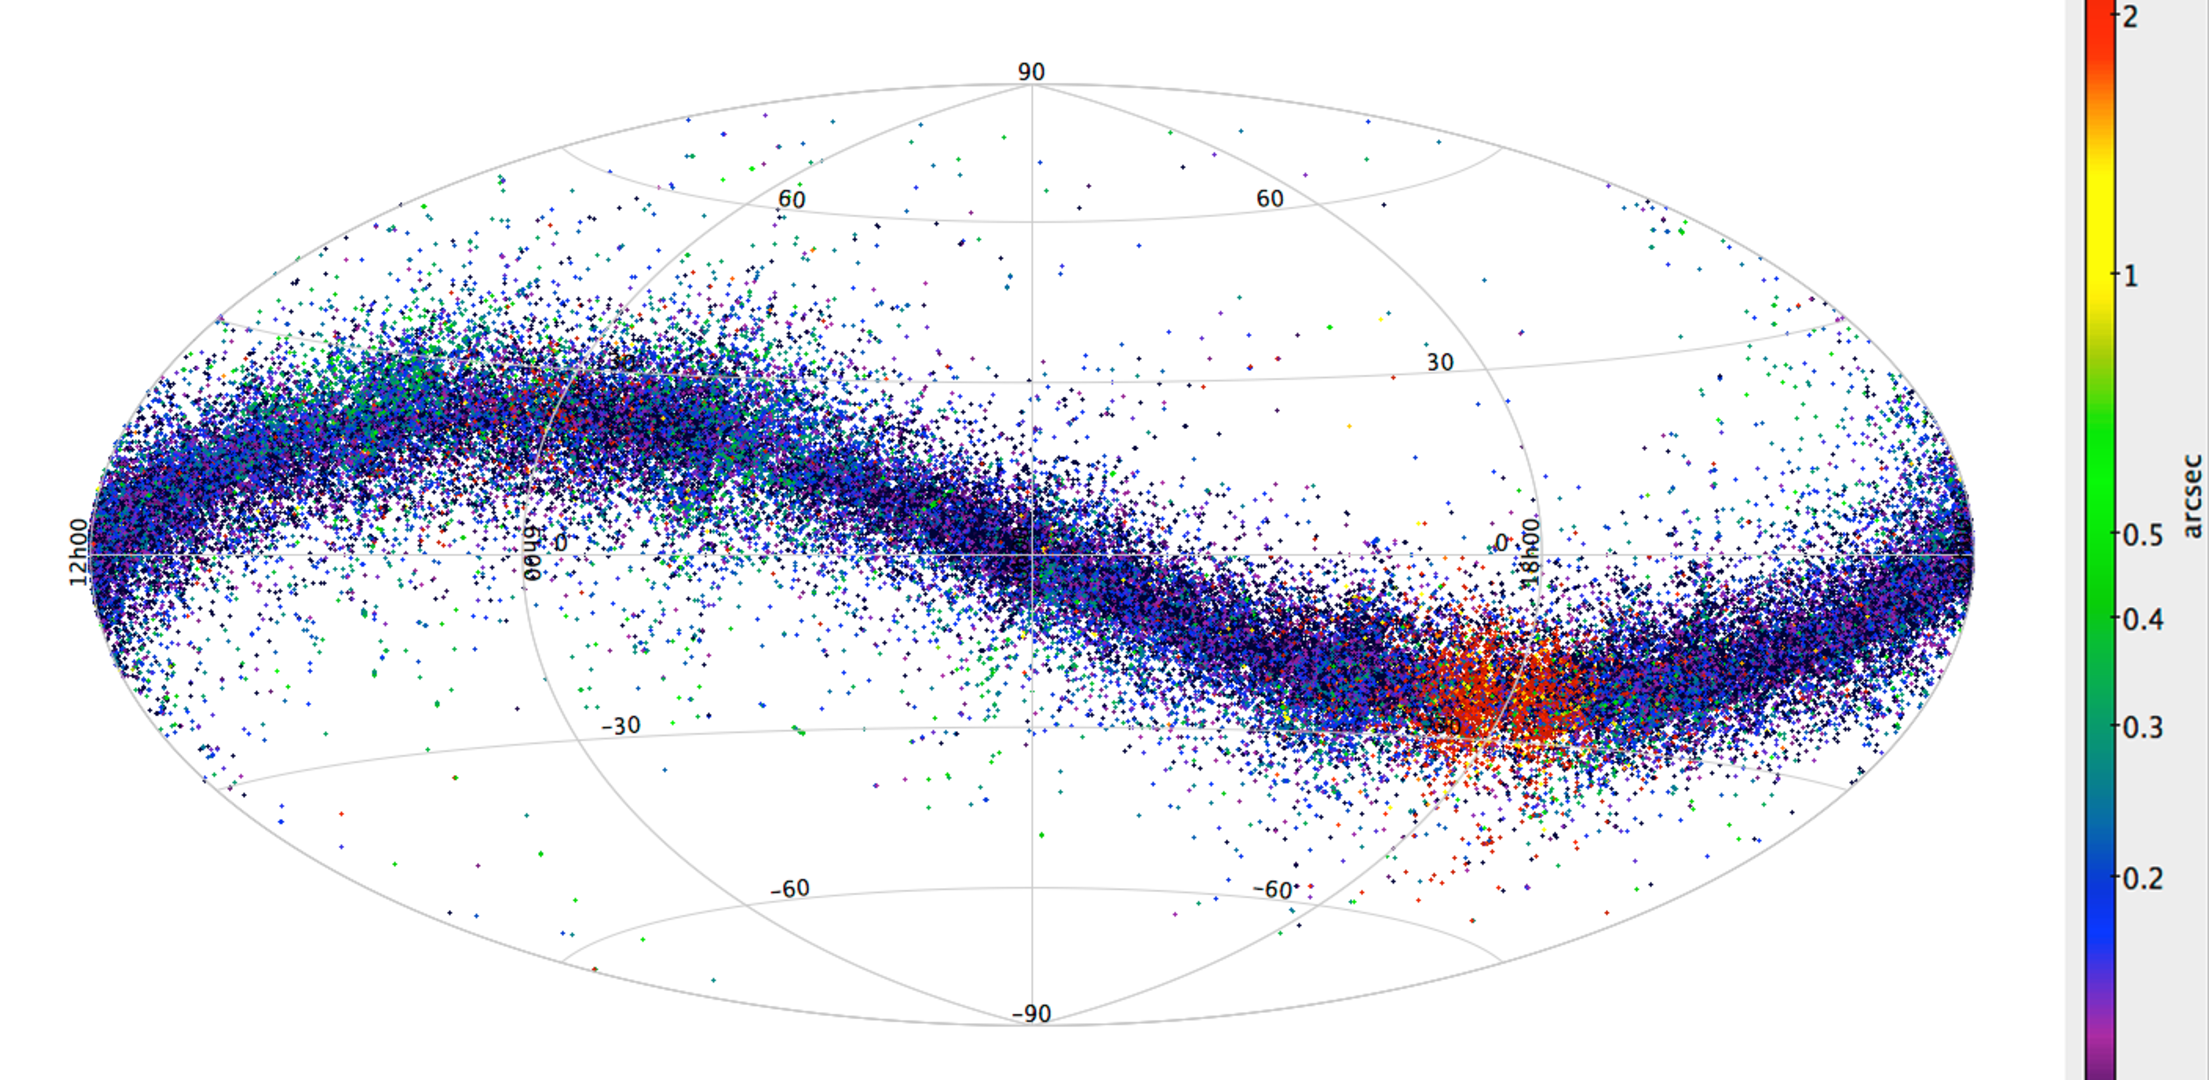 Gaia Asteroid detections